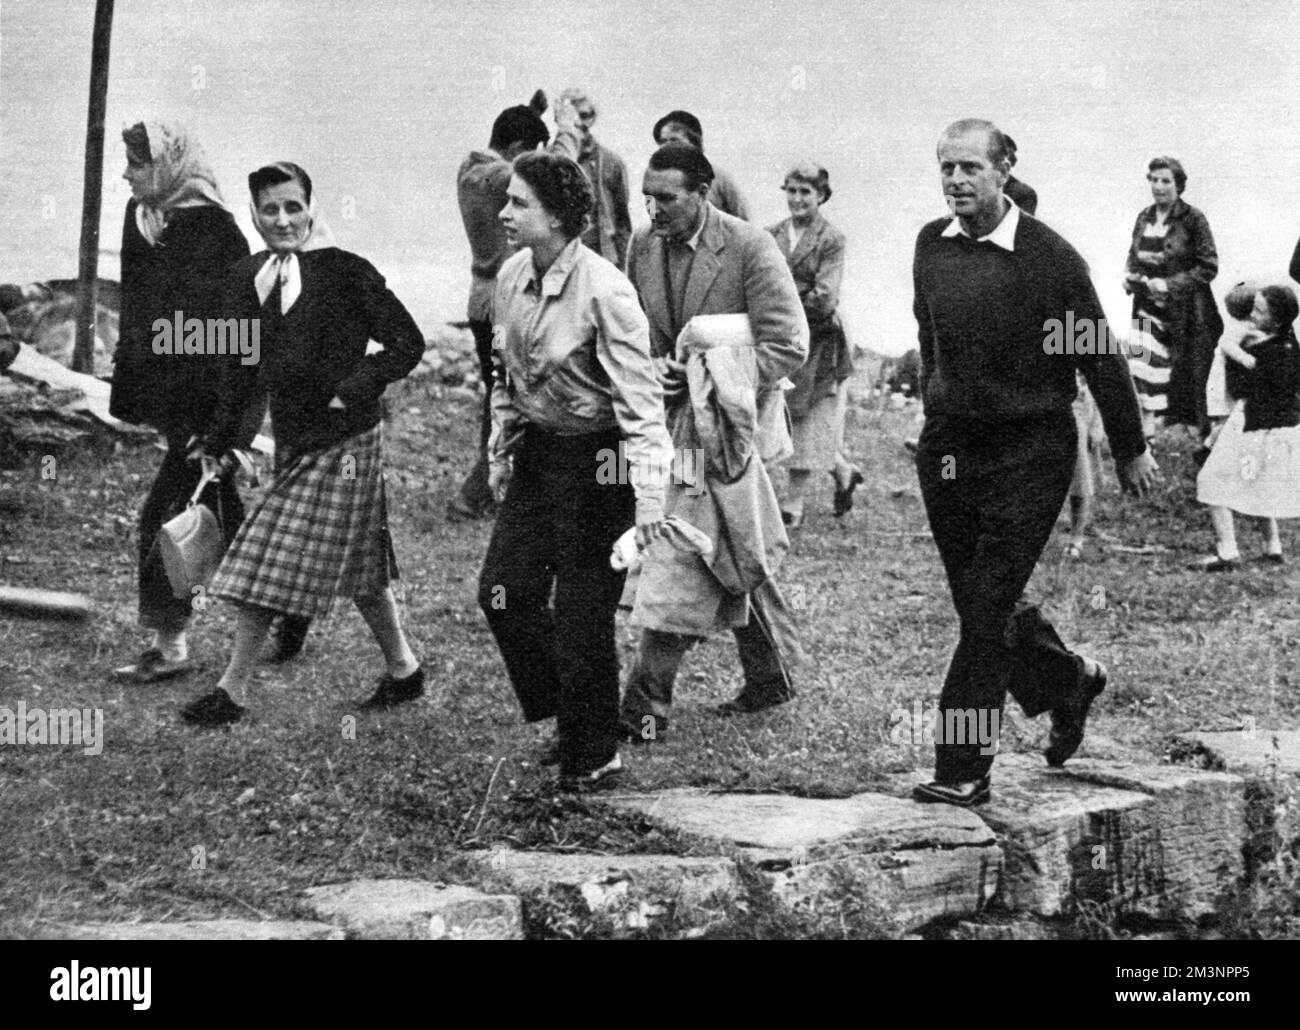 Queen Elizabeth II and Prince Philip enjoy a summer holiday at Balmoral, on this occasion they walk up the jetty at Applecross to visit the home of Major and Mrs John Wills, friends of the Royal family.       Date: 1958 Stock Photo